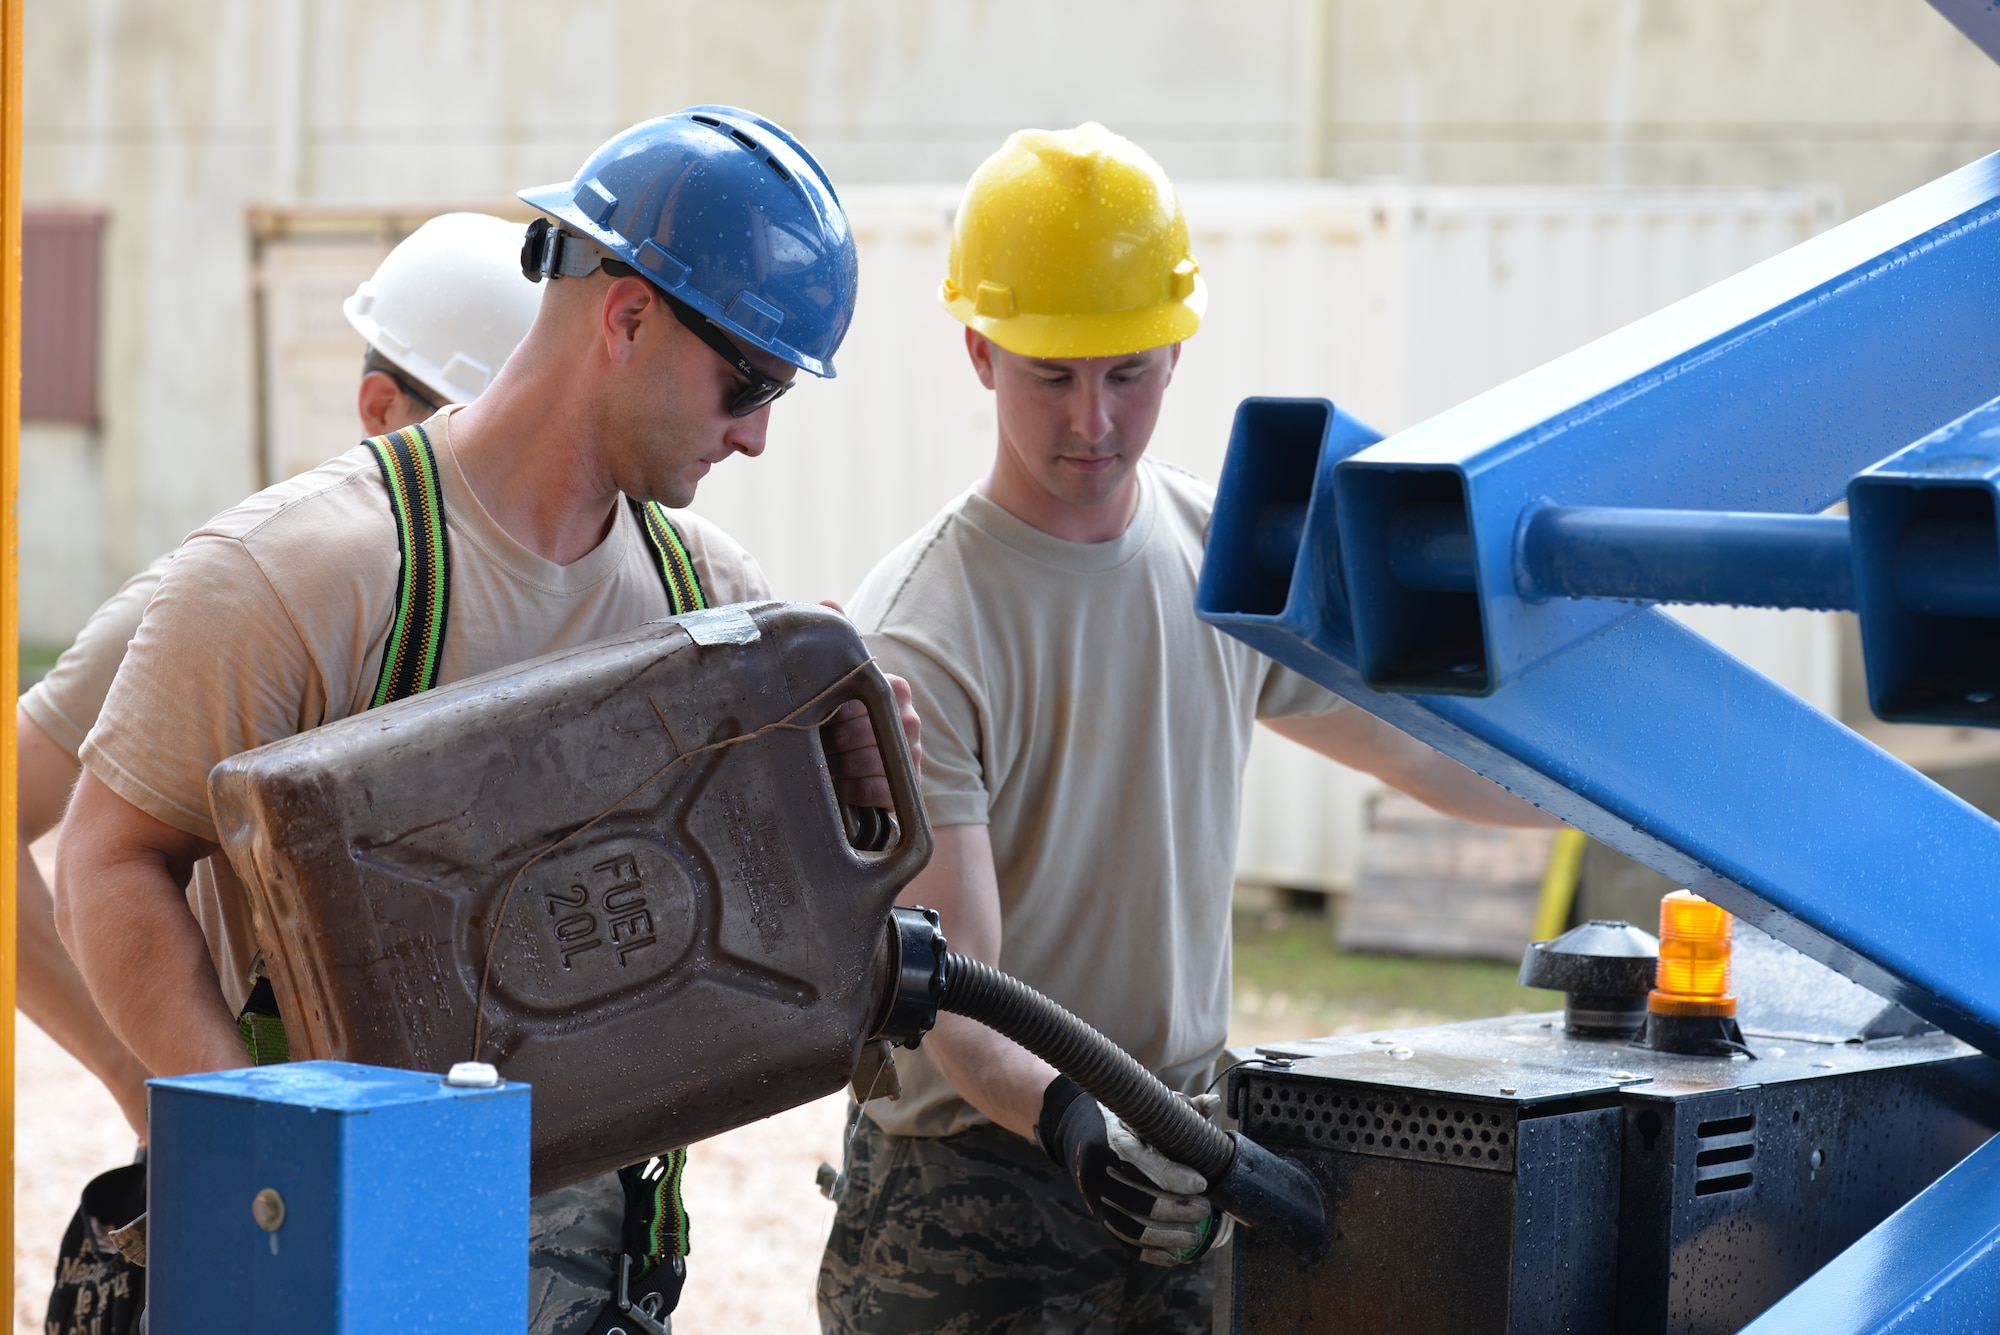 From the left, New Hampshire Air National Guardsmen Tech. Sgt. Ben Kipp and Senior Airman Benjamin Keeler fill up a scissor lift vehicle, Andersen Air Force Base, June 21, 2016. The 157 CES Airmen are deployed to Guam for annual training where they are working on the Commando Warrior Field Training facility, part of an ongoing construction project at the Pacific Command Regional Training Center. (Air National Guard photo by Tech. Sgt. Aaron Vezeau)